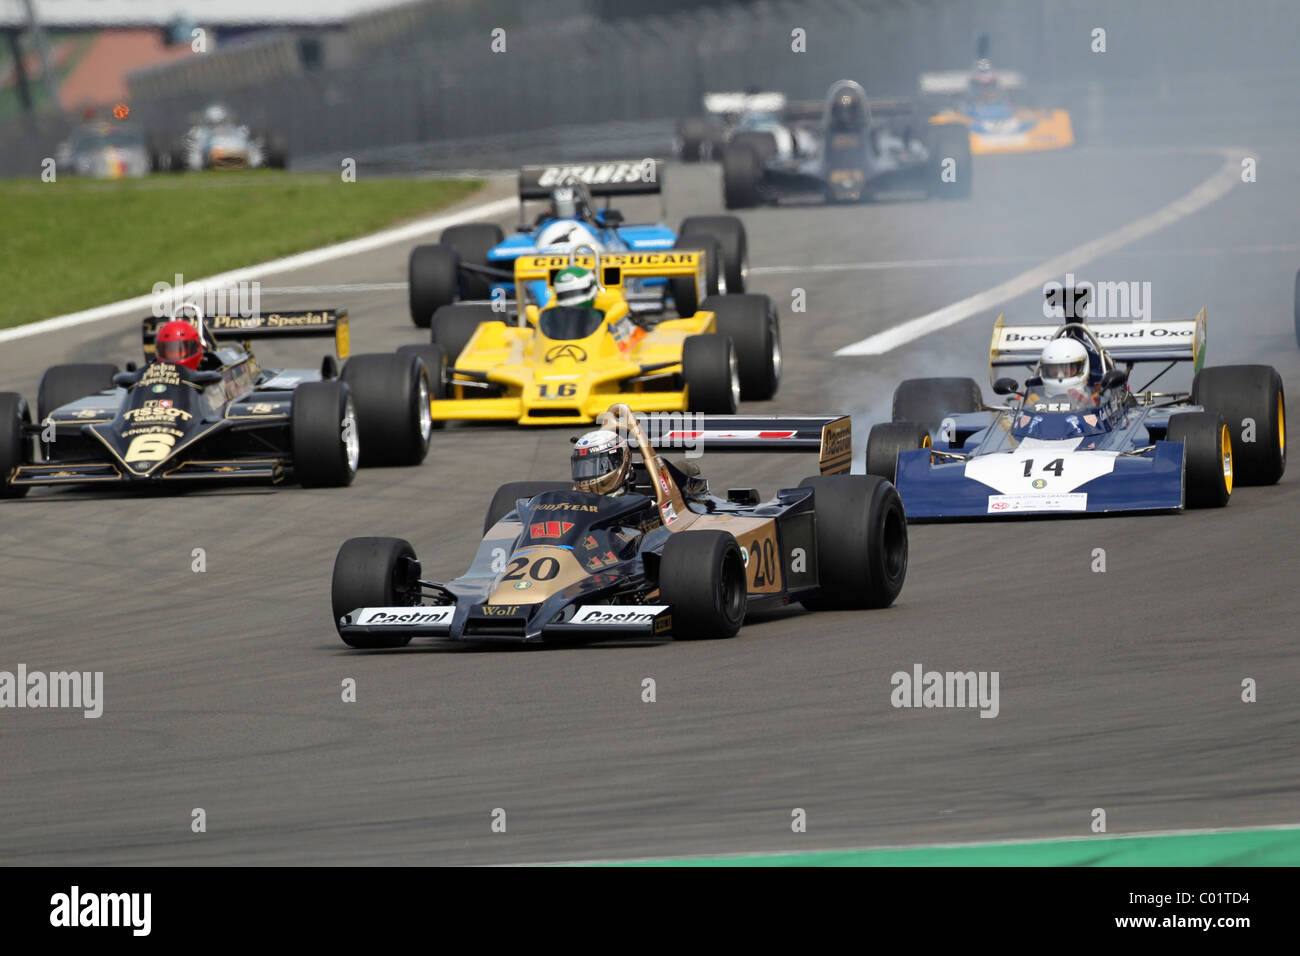 Race of the historic Formula 1 cars, in front Peter Wuensch in the Wolf WR 1, 1977, Oldtimer-Grand-Prix 2010 for vintage cars at Stock Photo